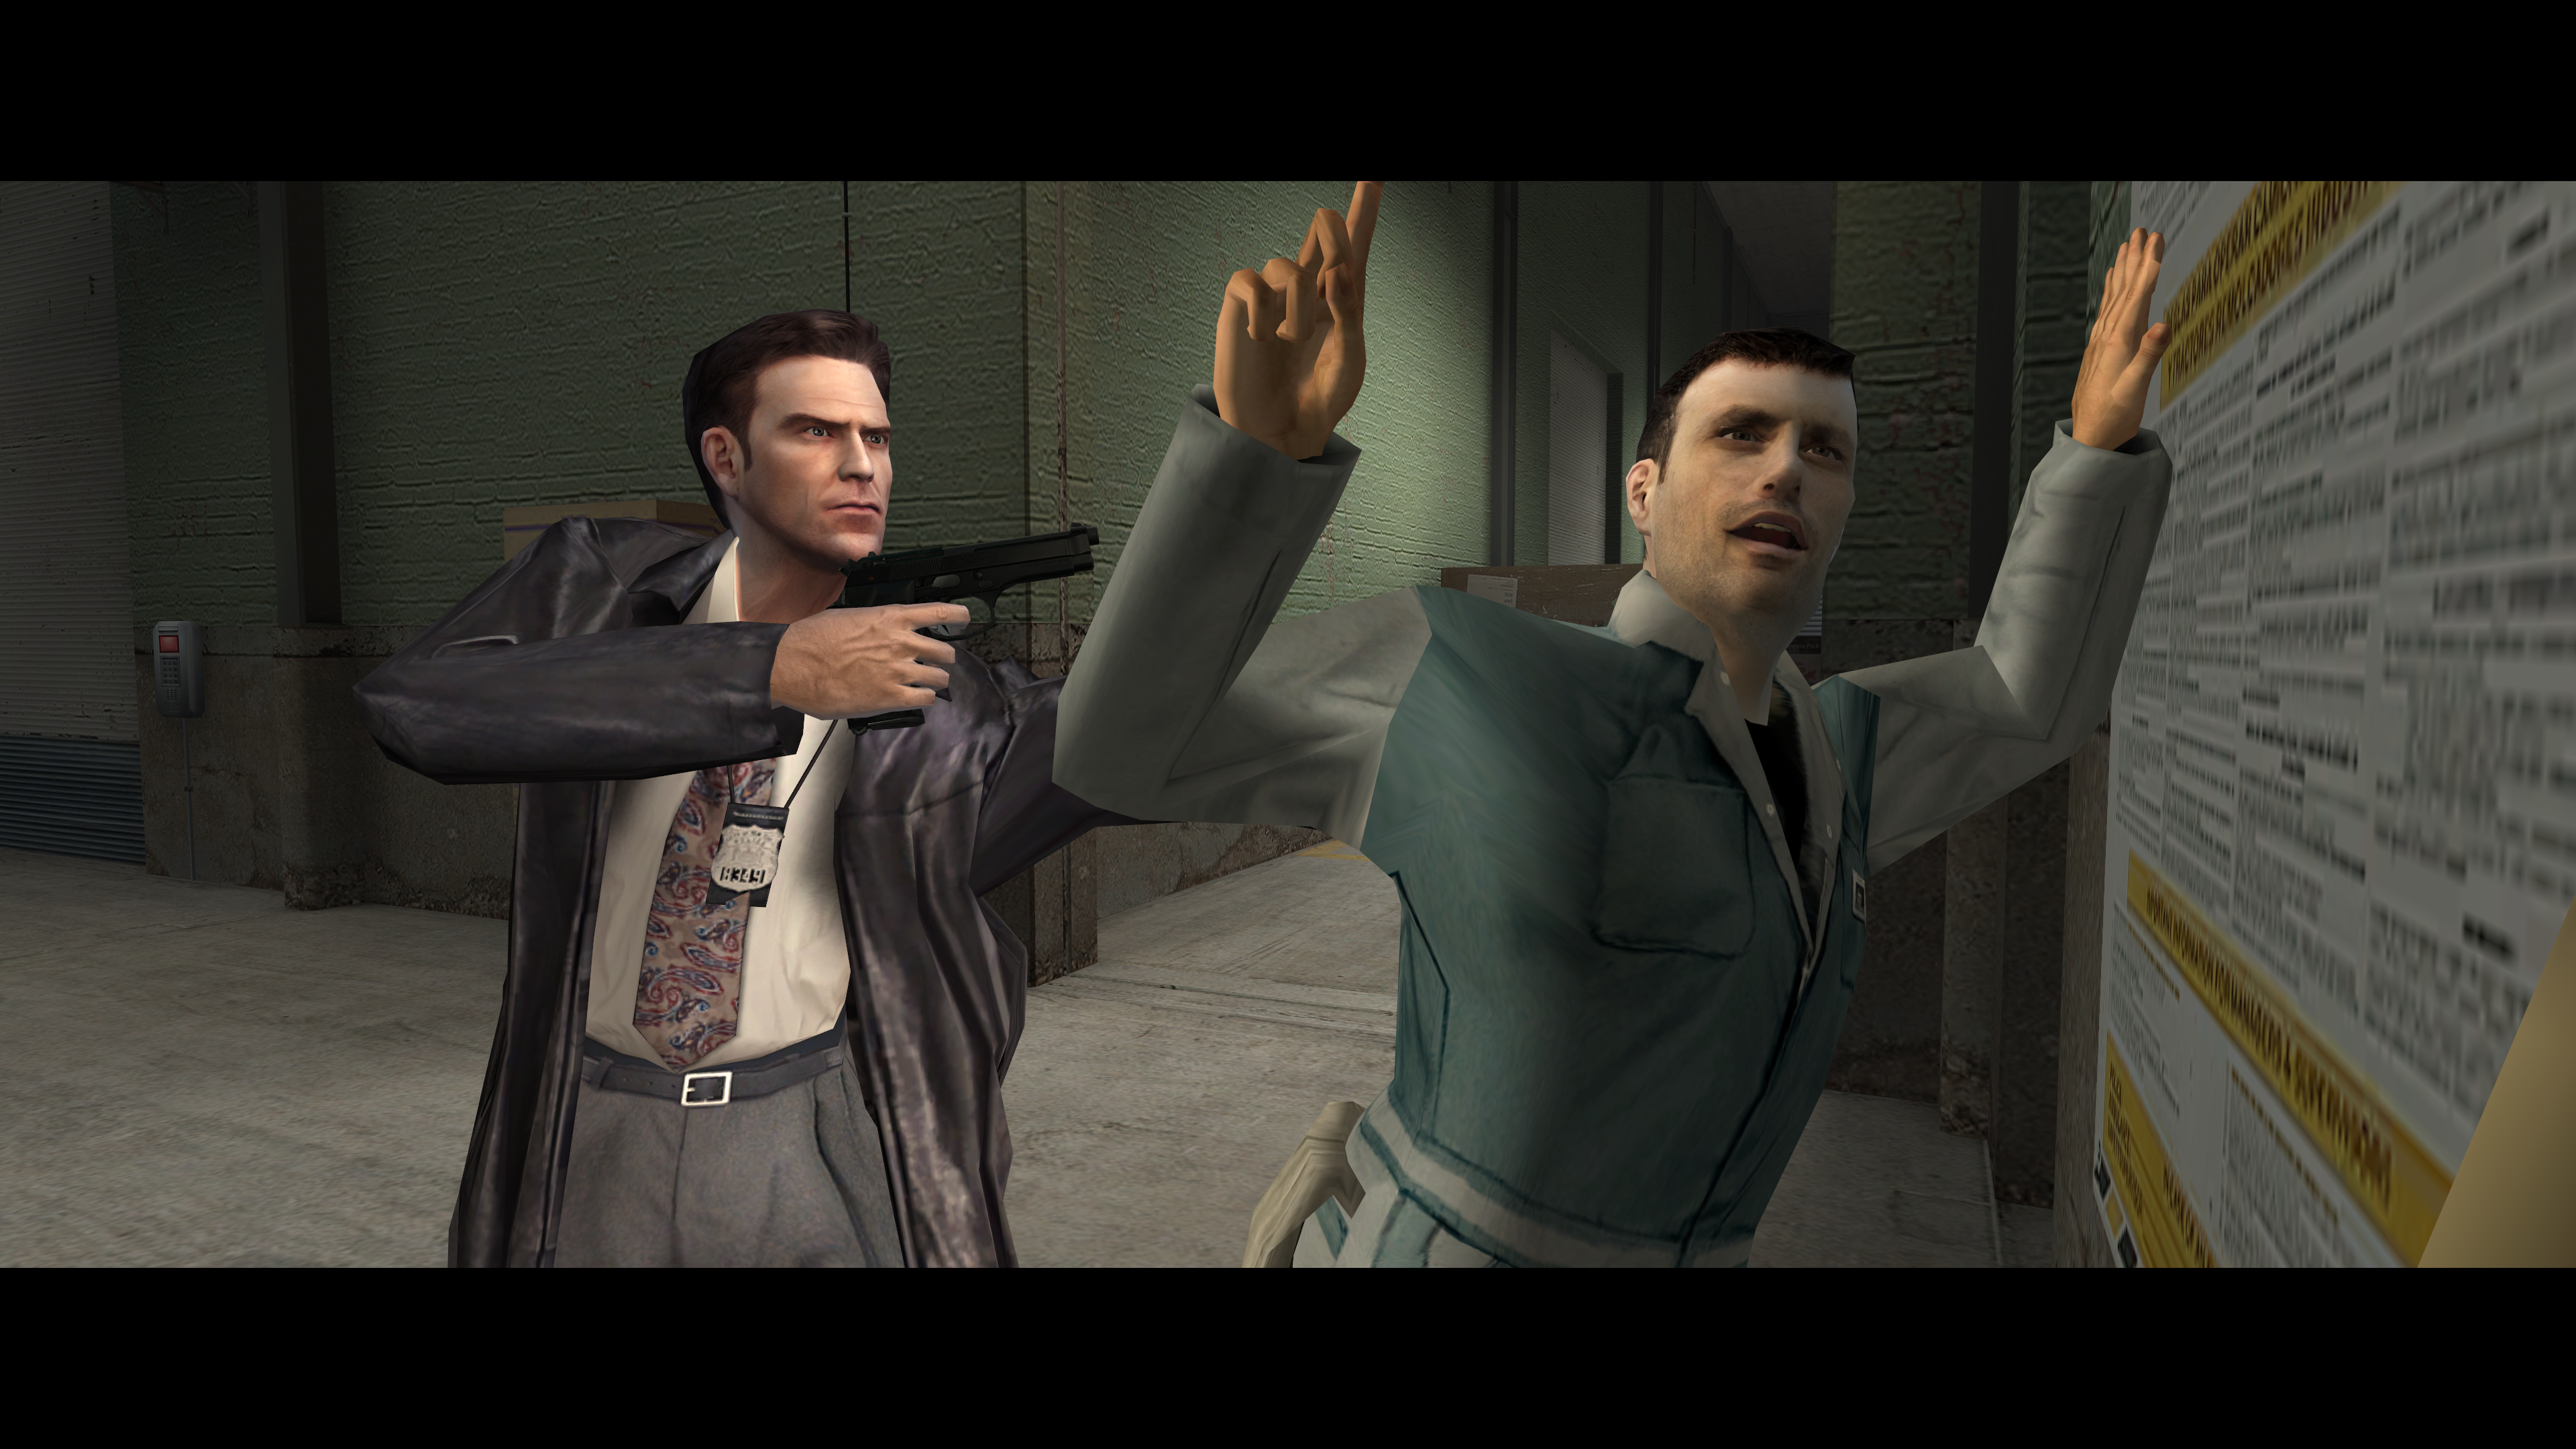 NeowinGaming: Revisiting Max Payne - the game that revolutionized gunplay -  Neowin